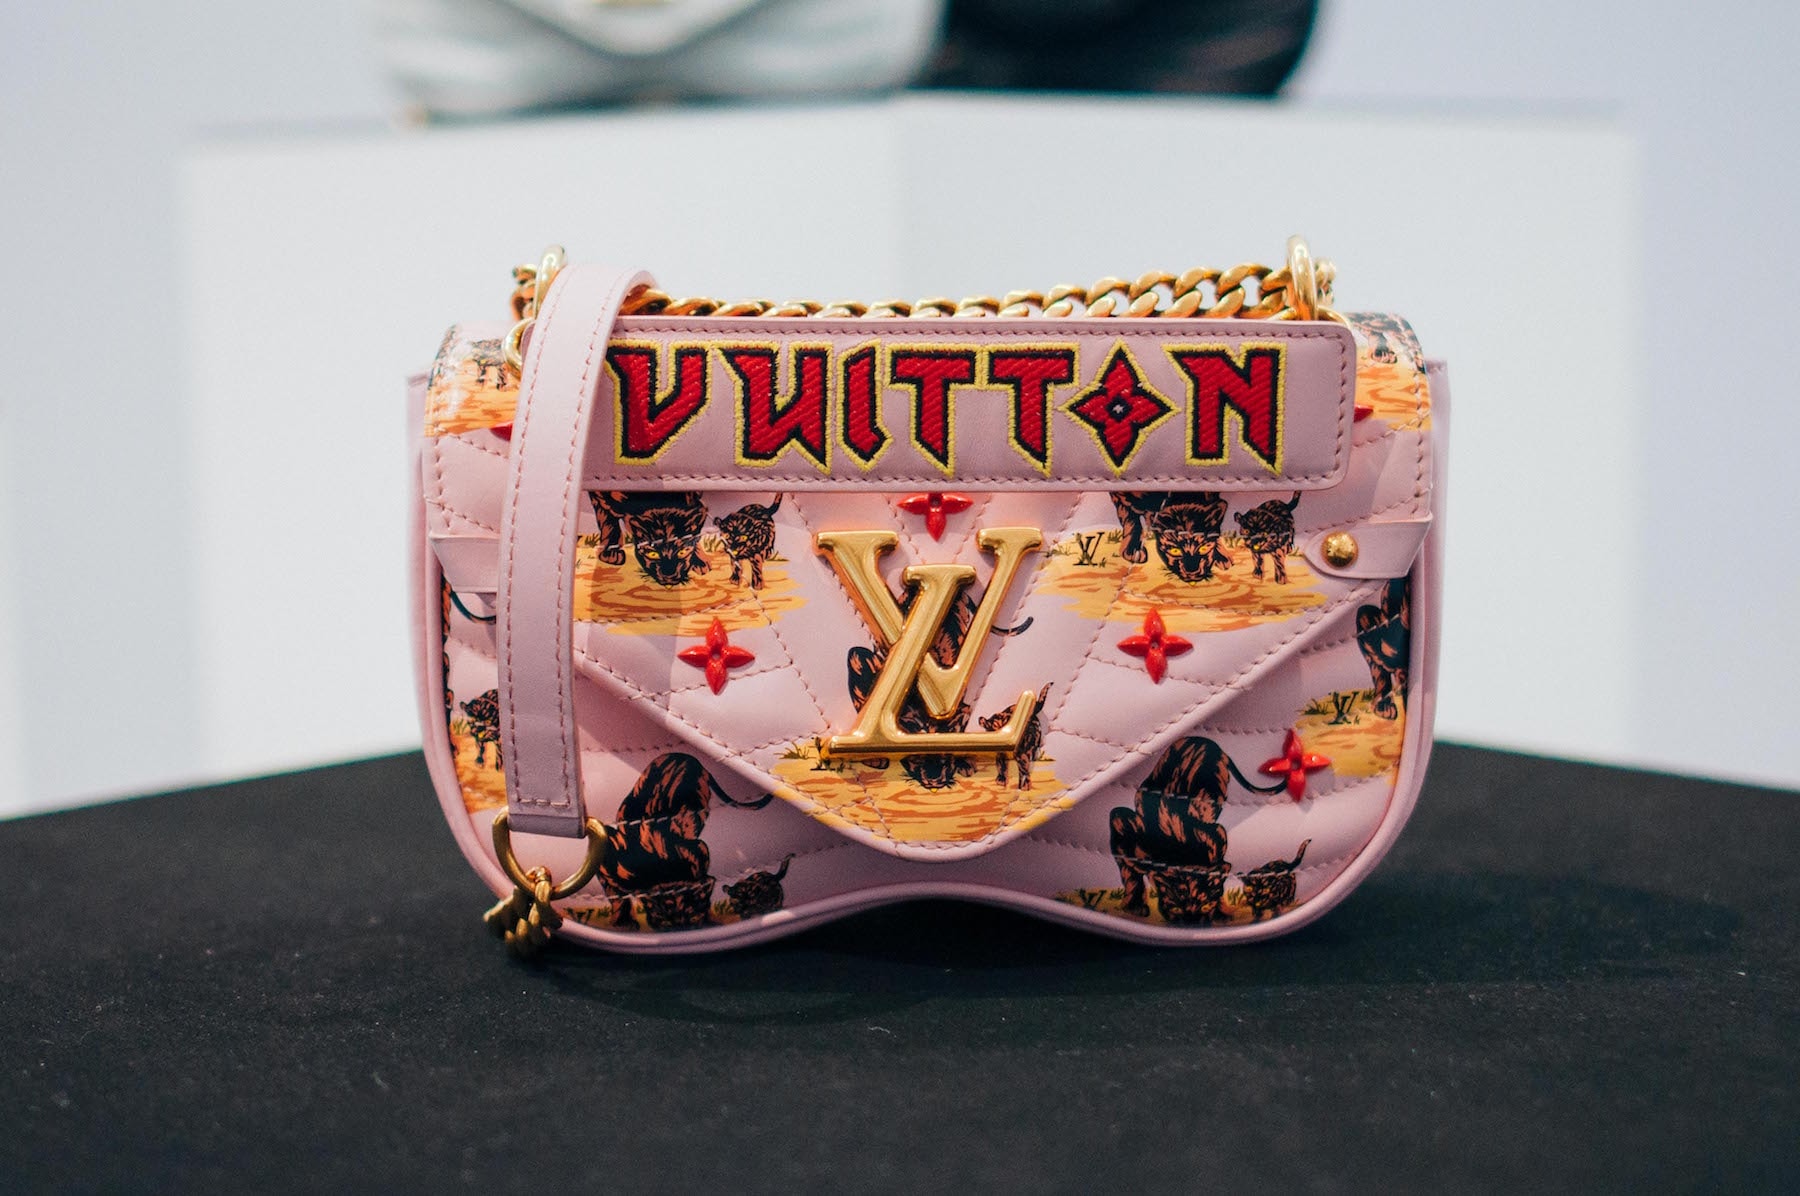 Louis Vuitton Fall/Winter 18 Collection Preview Nicholas Ghesquiere Kim Jones LV Monogram Alma Bag Carry All Jewelry